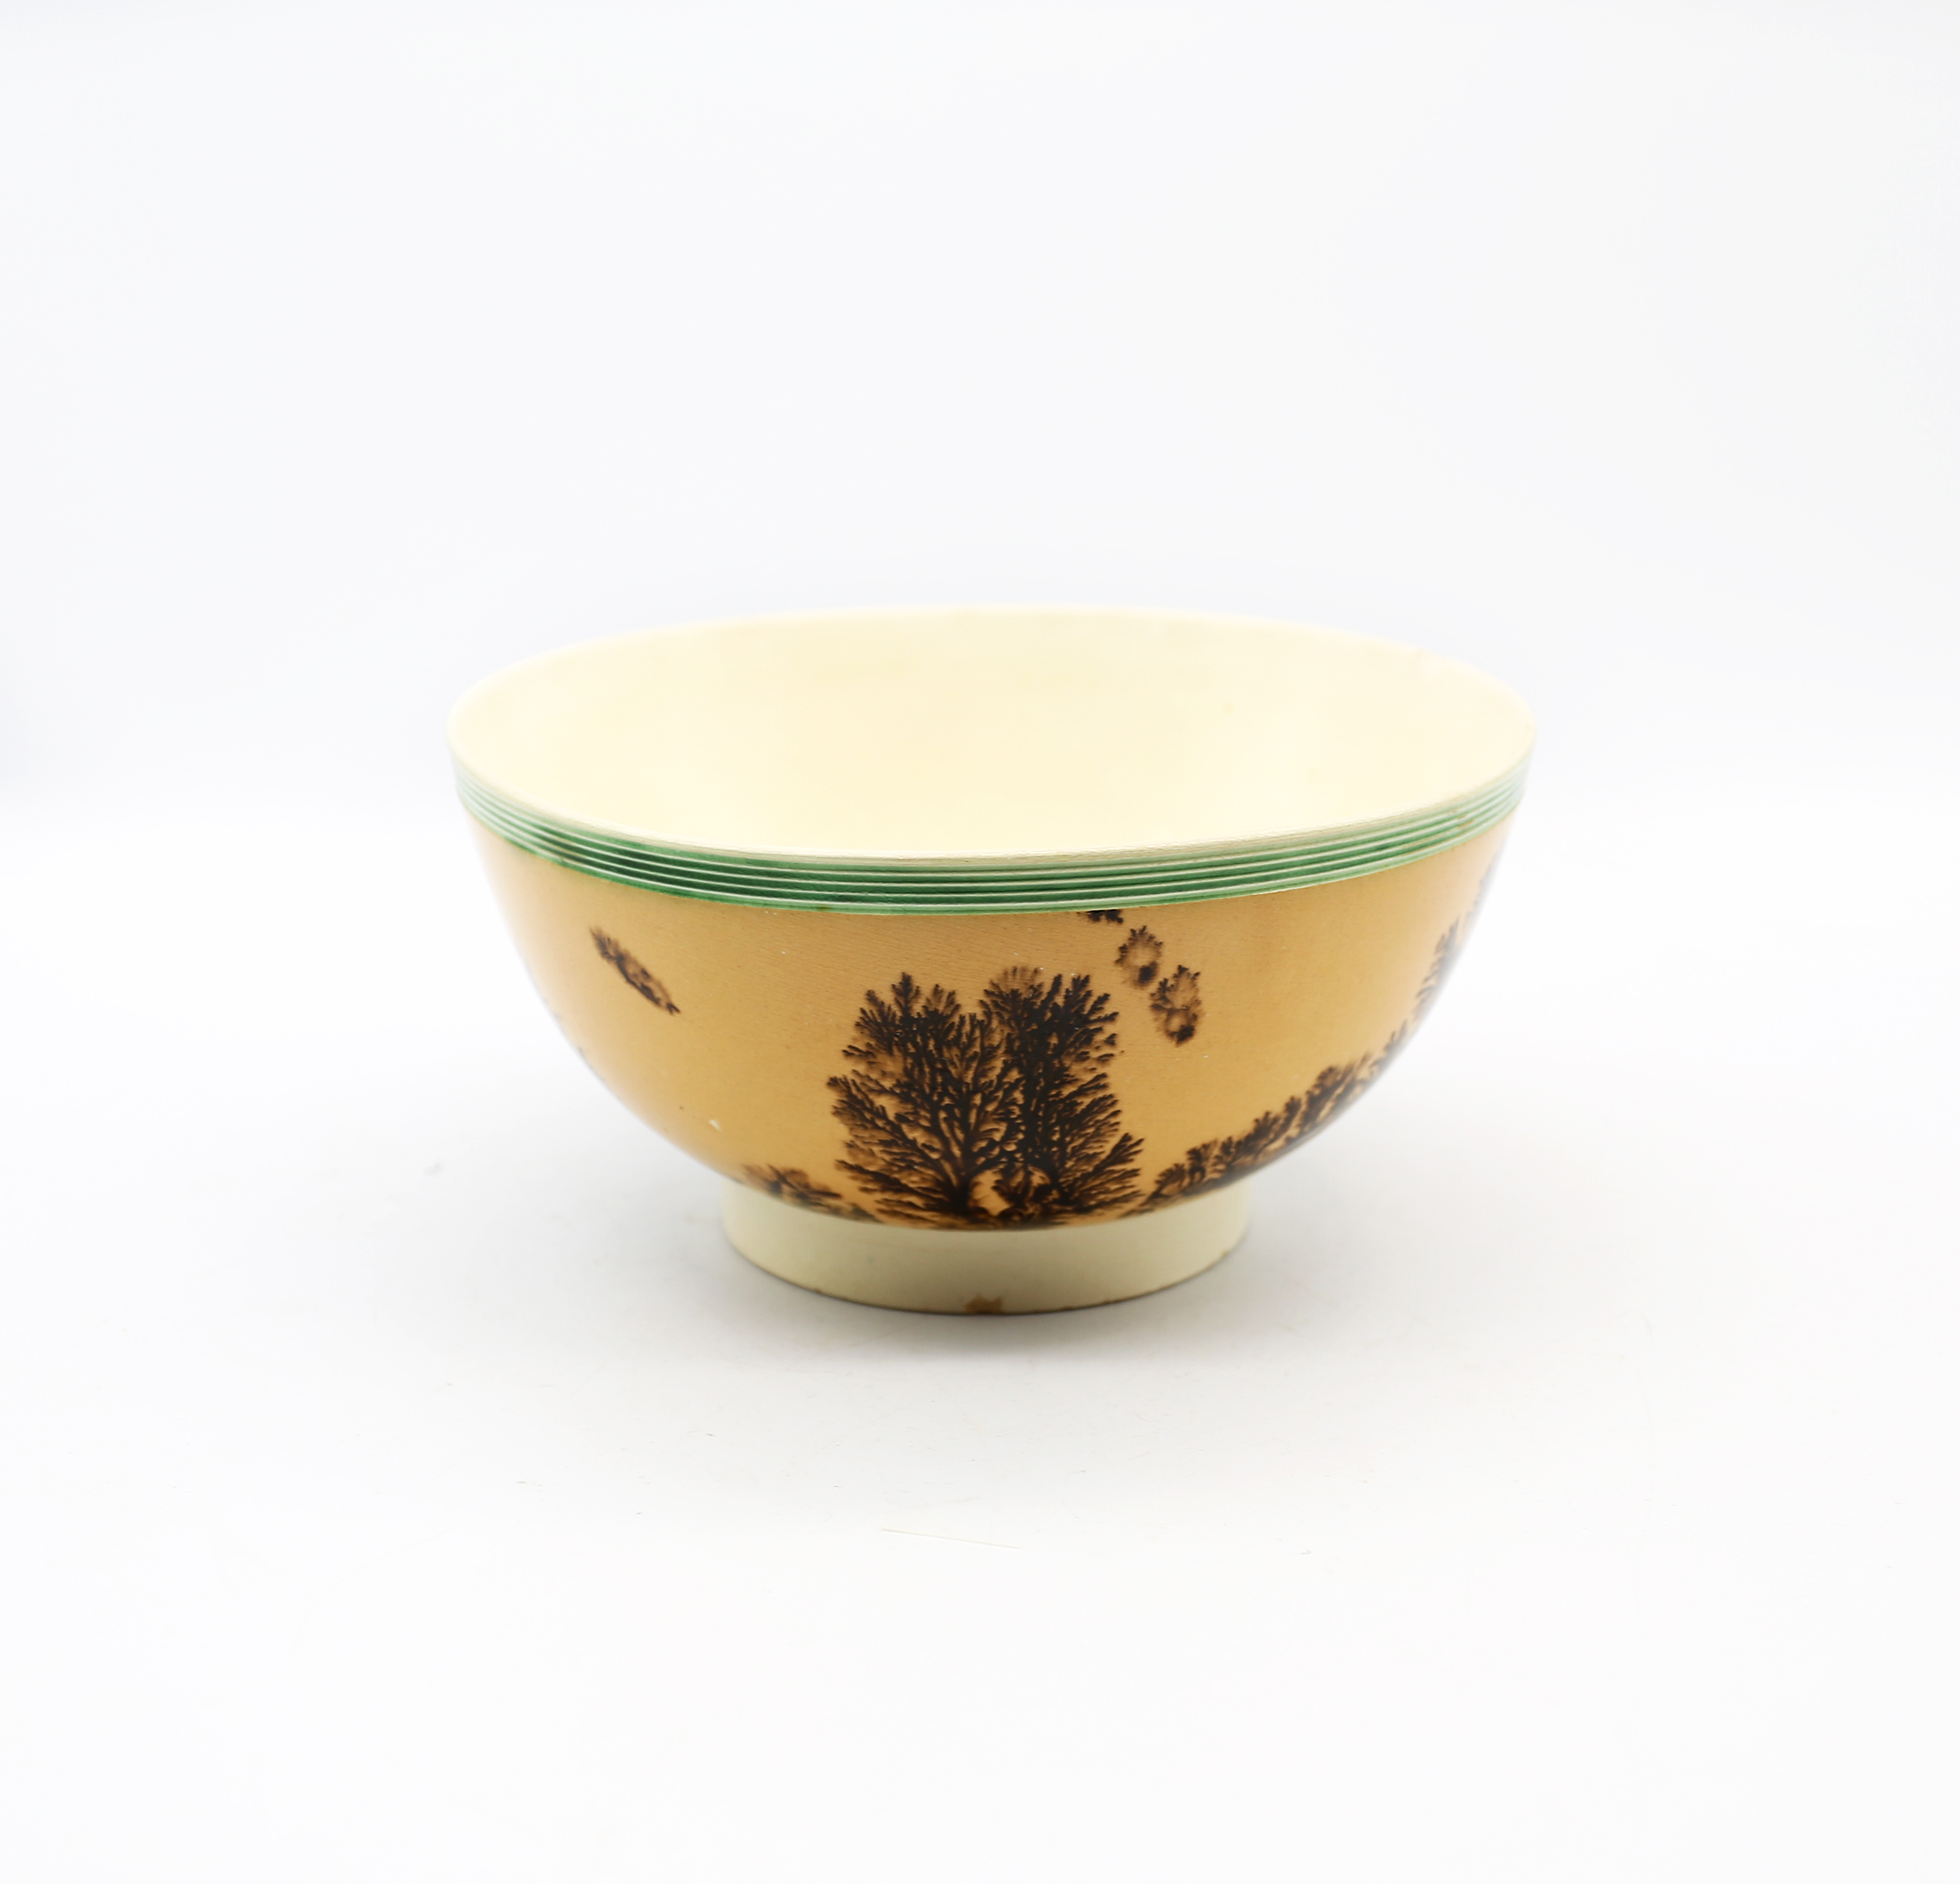 A creamware Mocha bowl, orange ground with black/sepia trees and a green ribbed band to top rim